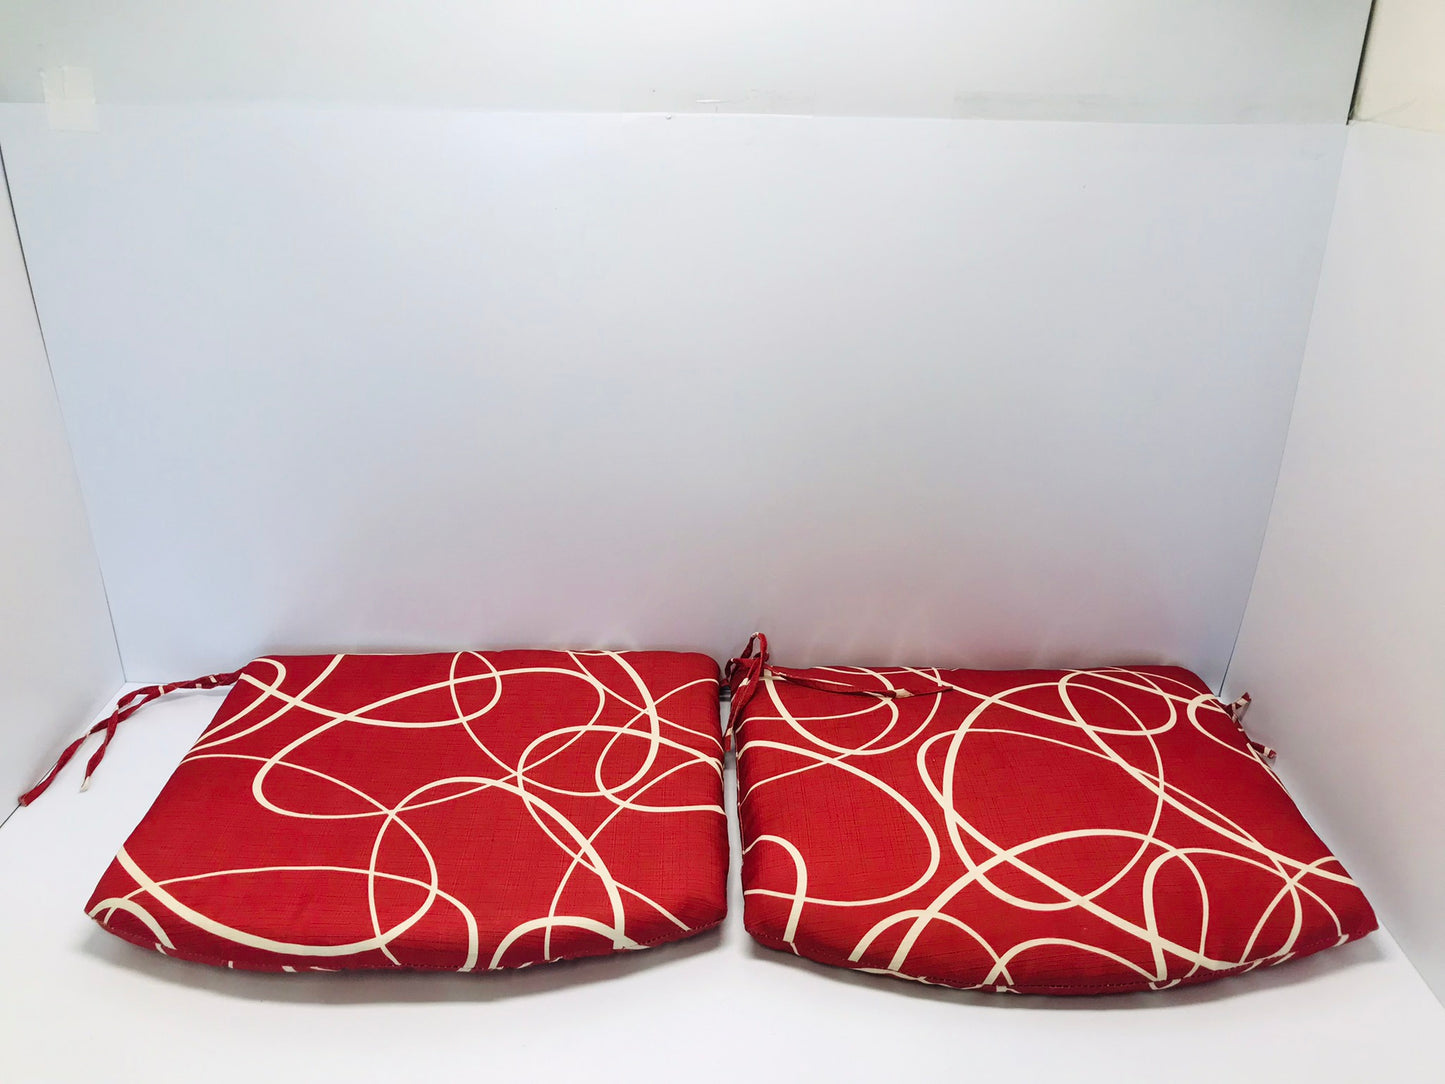 Camping Patio Deck Outdoor Chair Cushions 18x20 inch Set of 2 Red White Like New